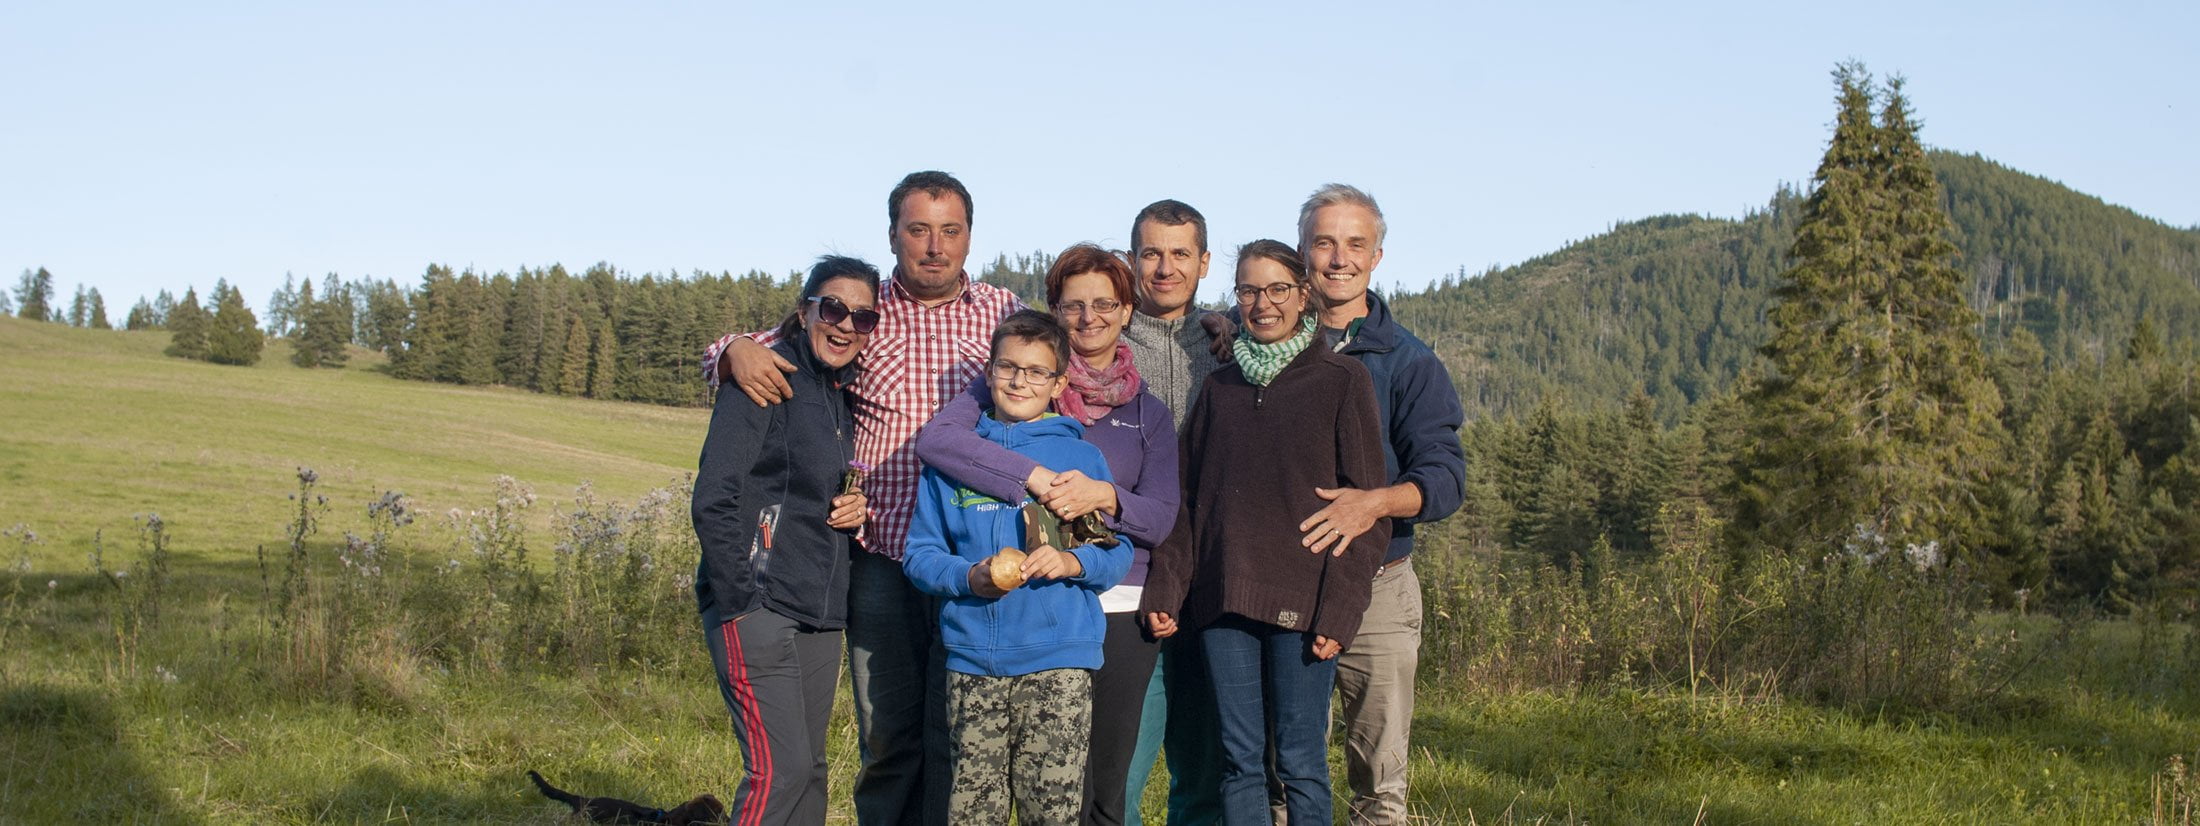 group of seven adult friends including a boy photographed on a meadow in pine woods